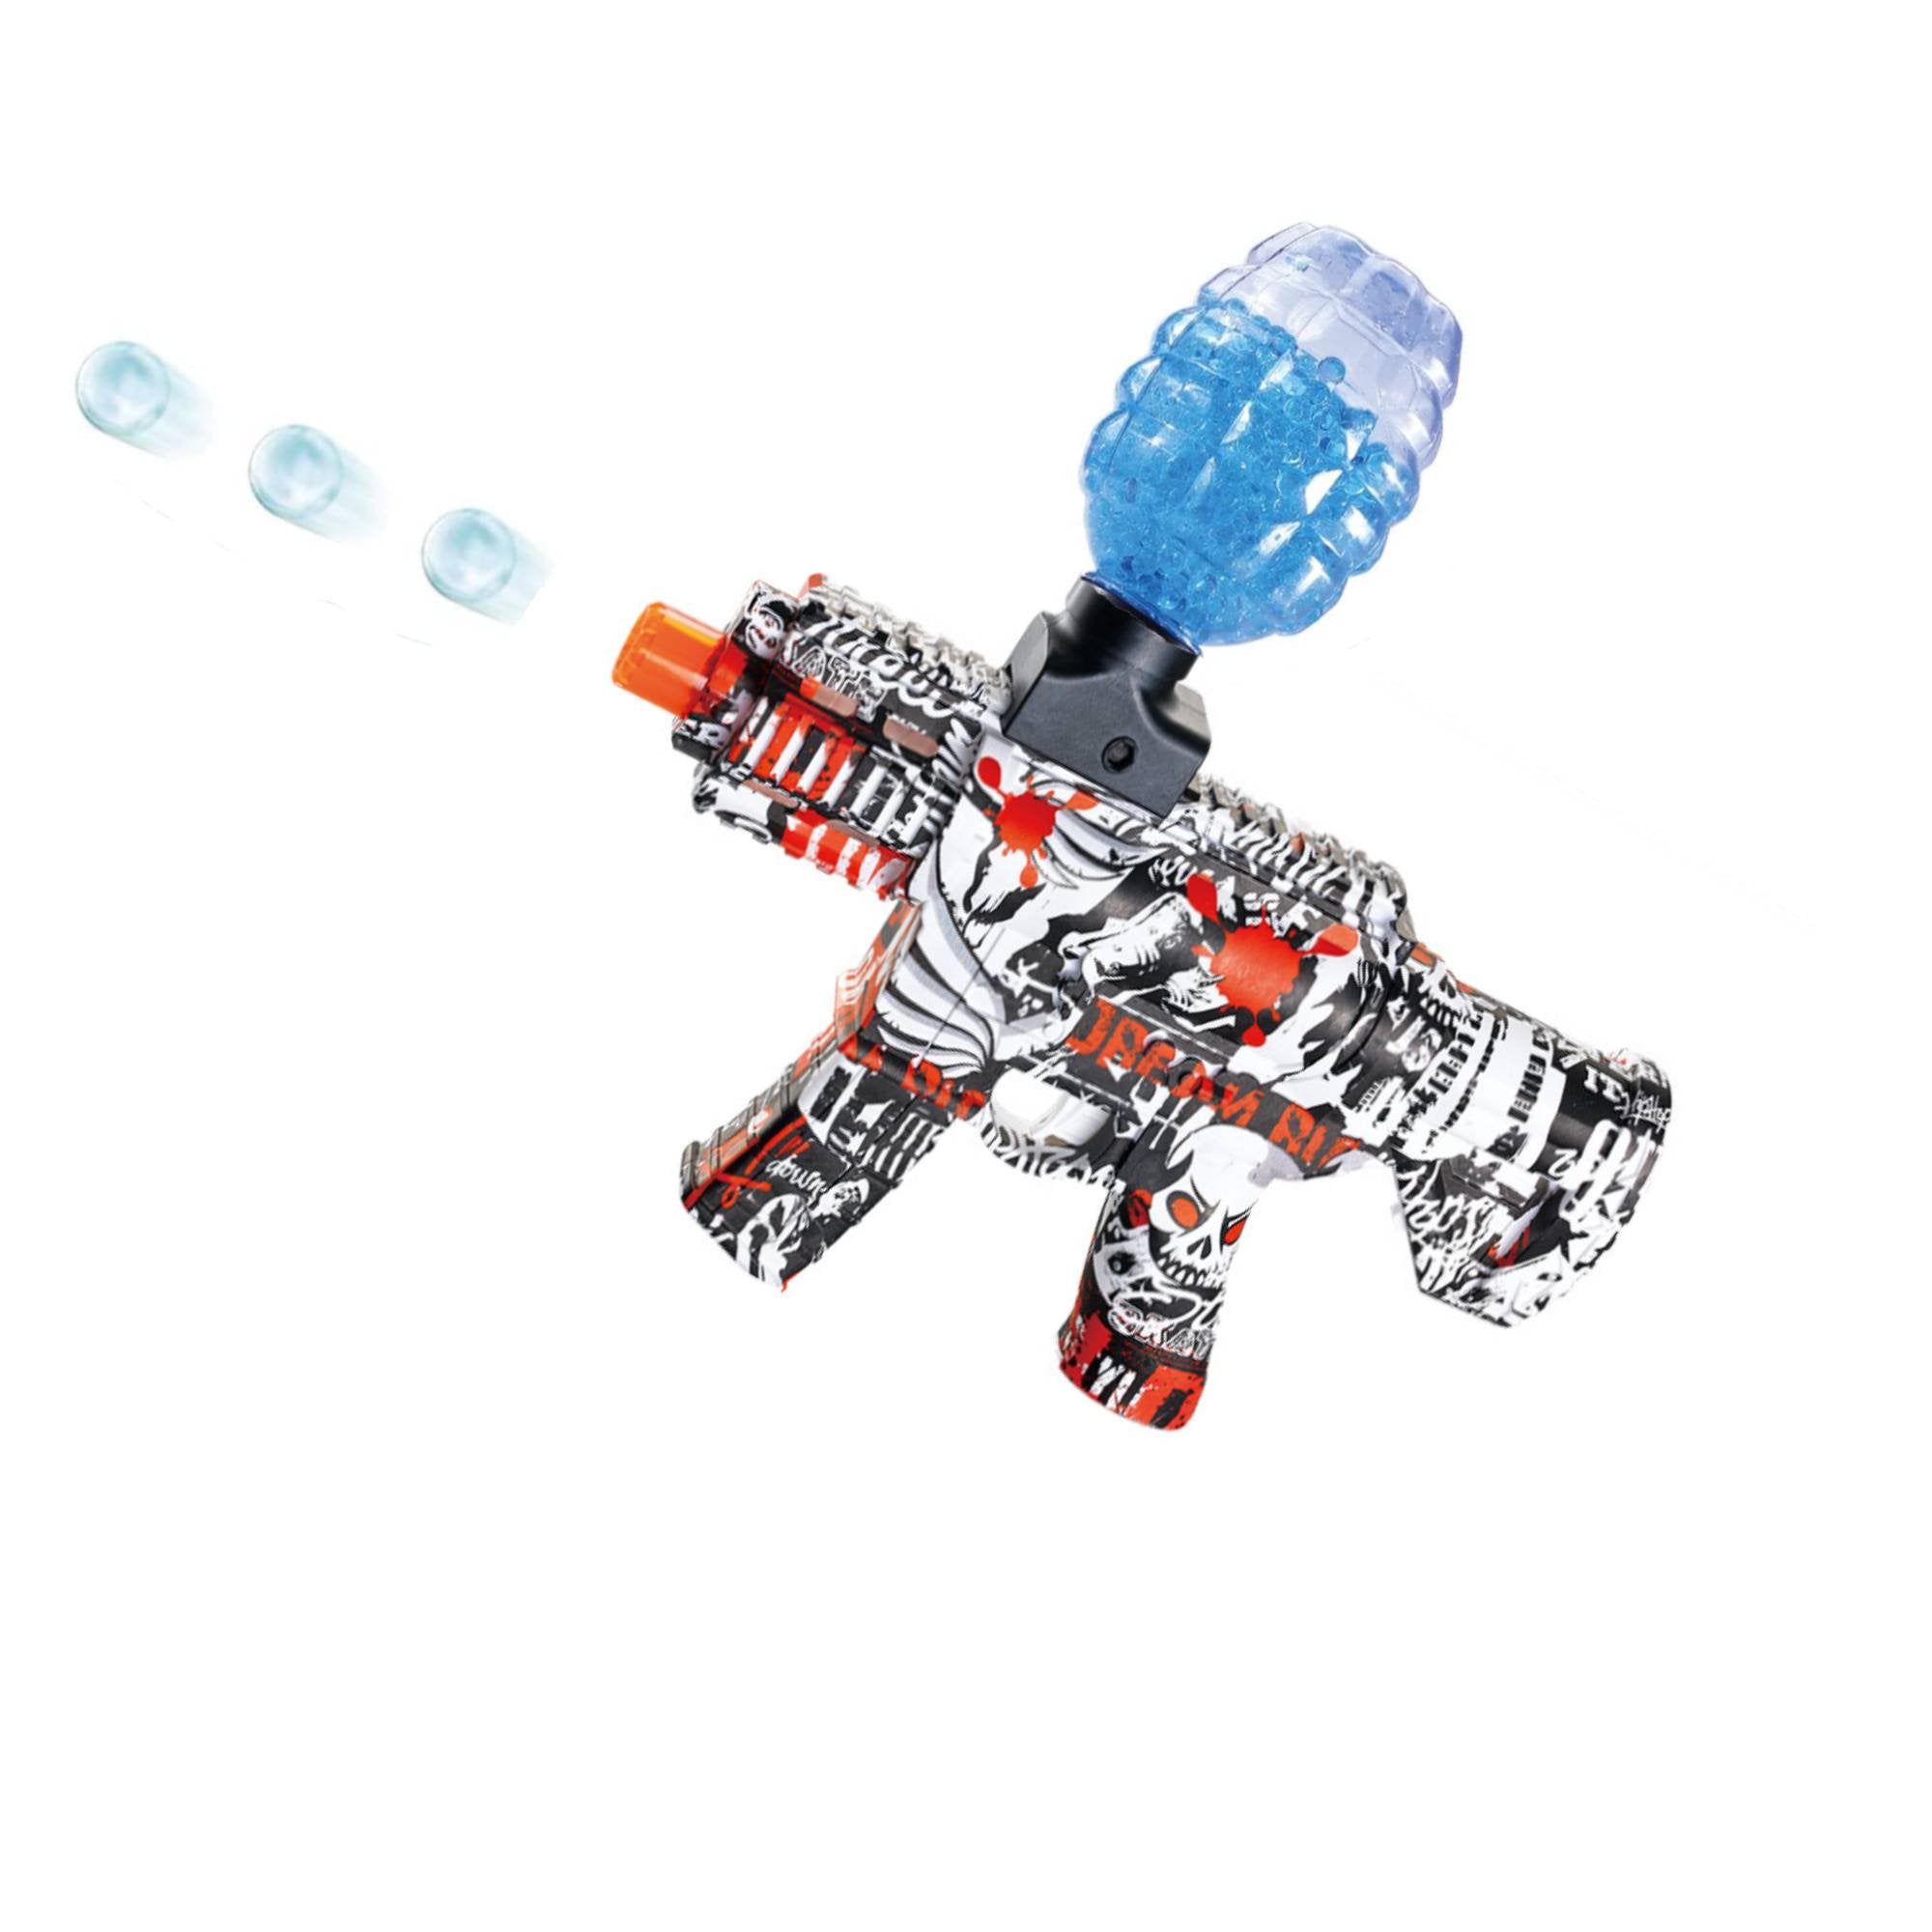 Electric Gel Ball Blaster, Auto Gel Ball Blaster with 40000 Water Beads and Goggles, Outdoor Games for Teens, Boys, and Girls Ages 7+, Red